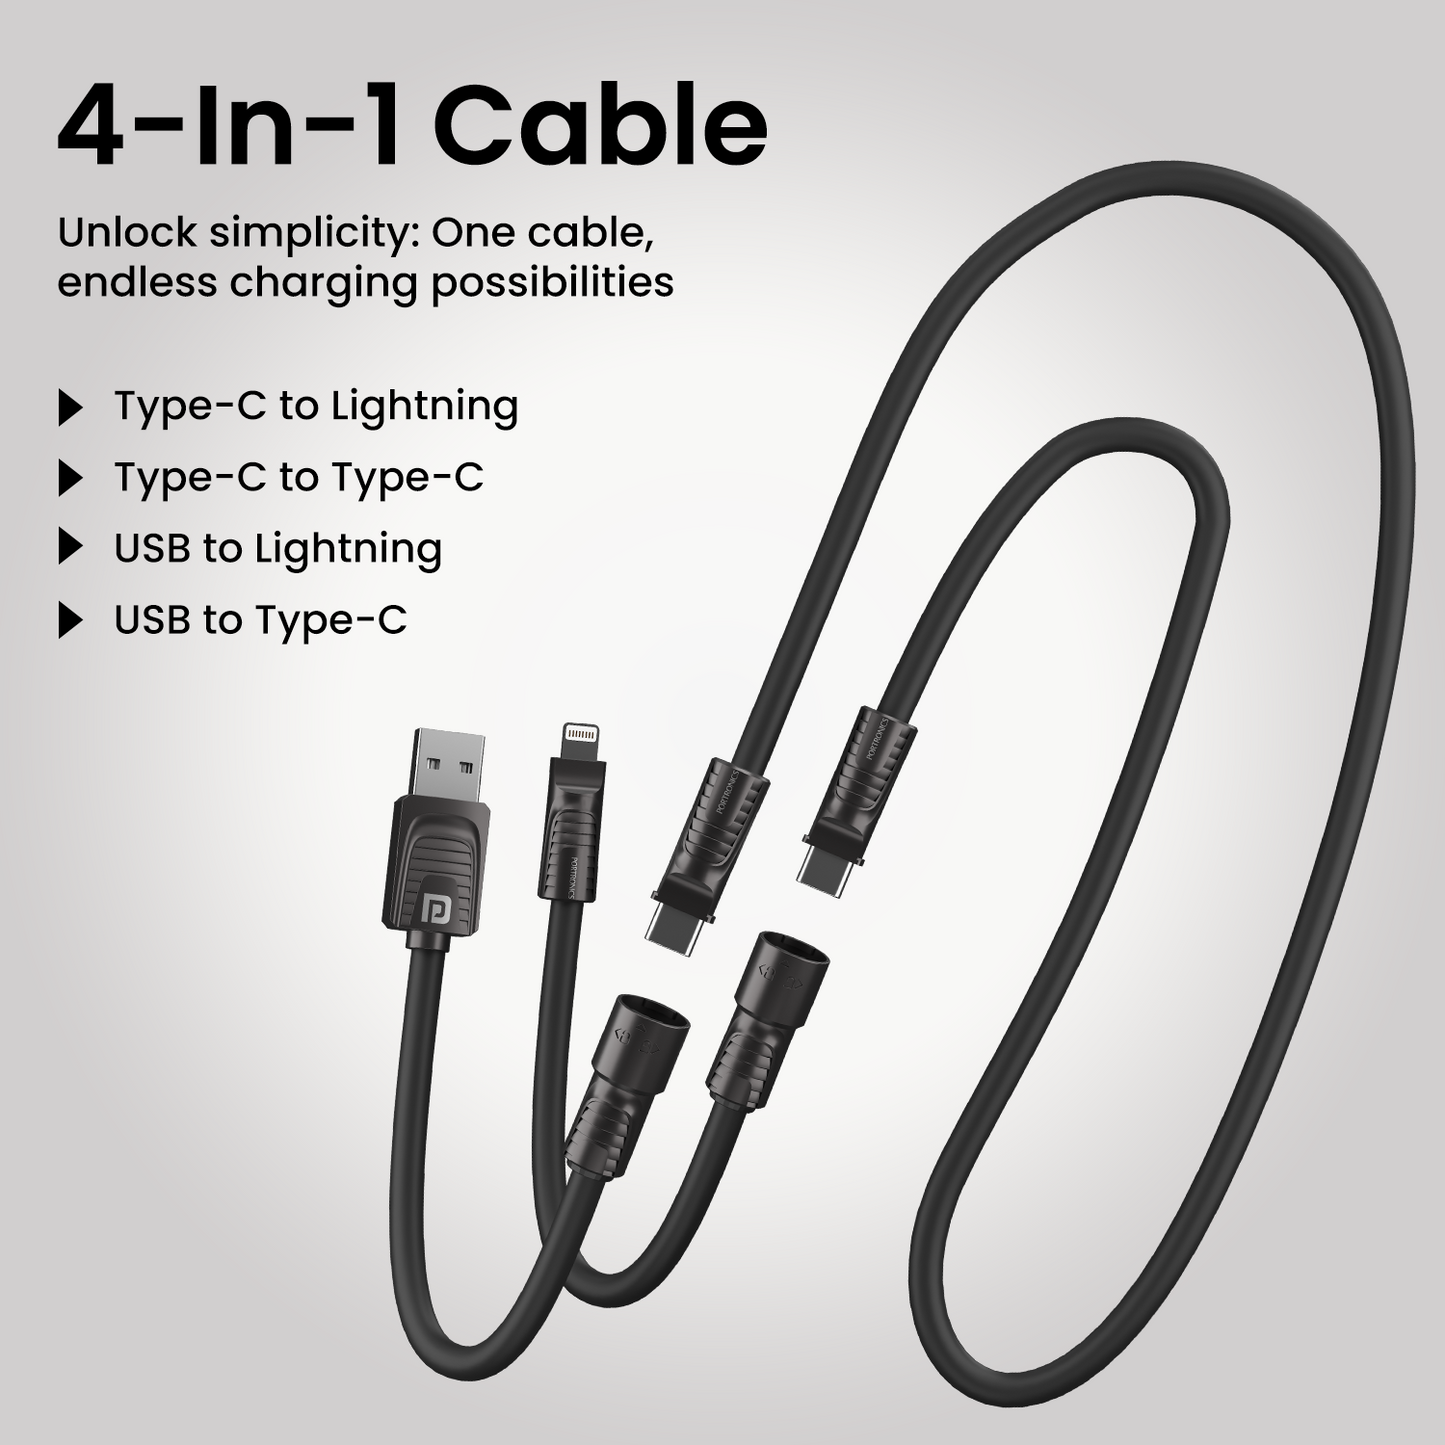 Black Portronics Konnect Tetra 4 in 1 type c to type c charging cable| type c to type c cable| usb cable to type c| 